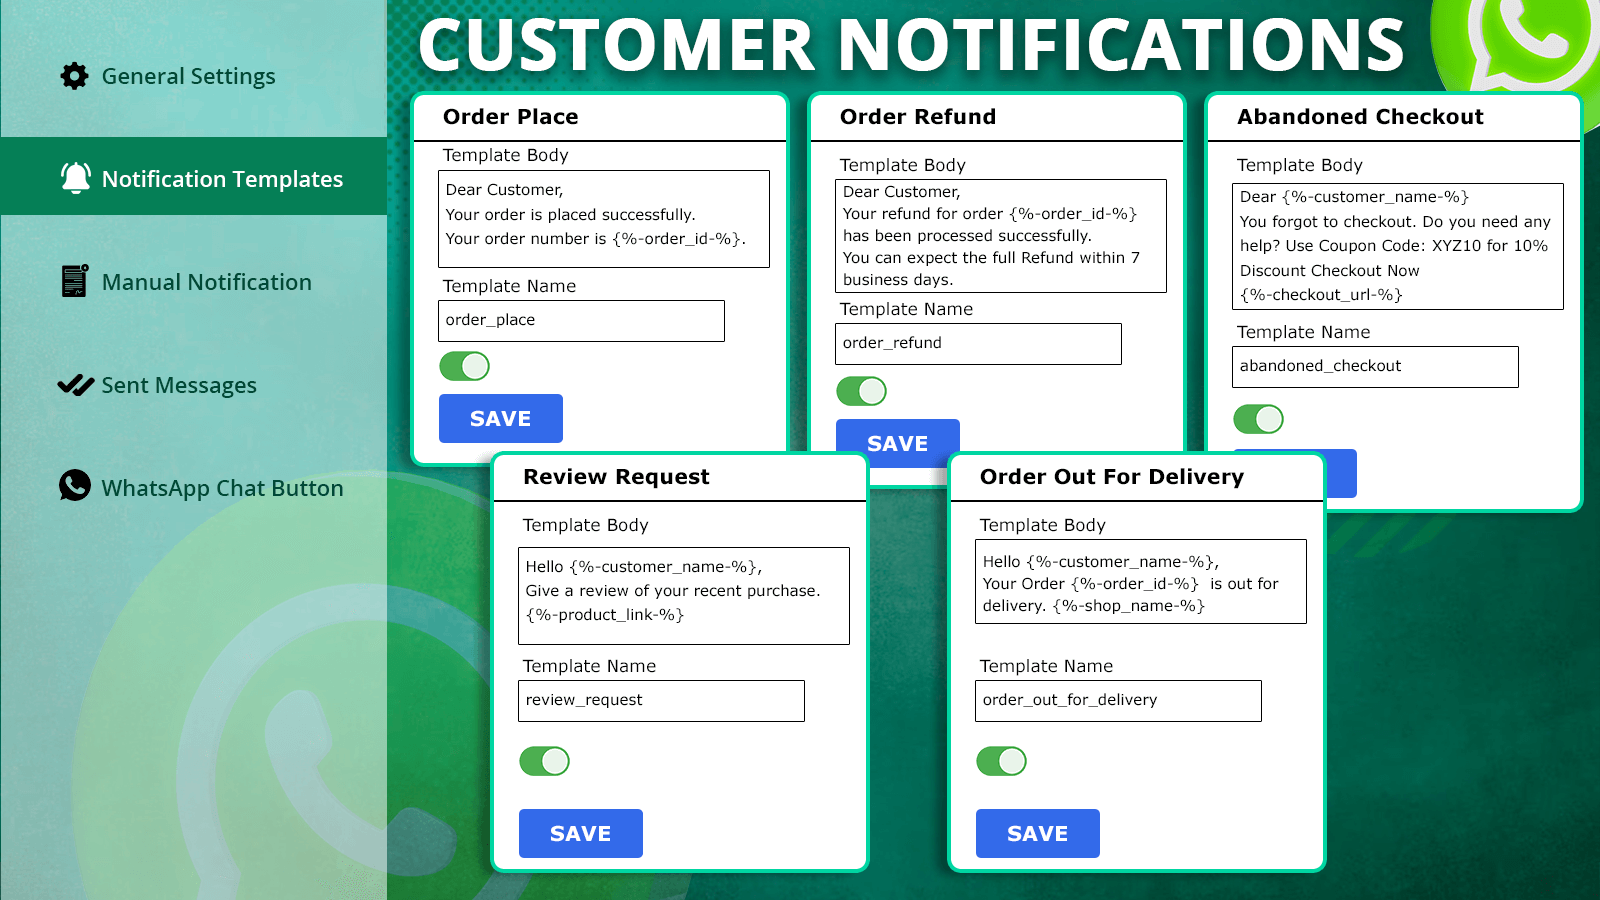 Customized WhatsApp Notification Templates for Customers